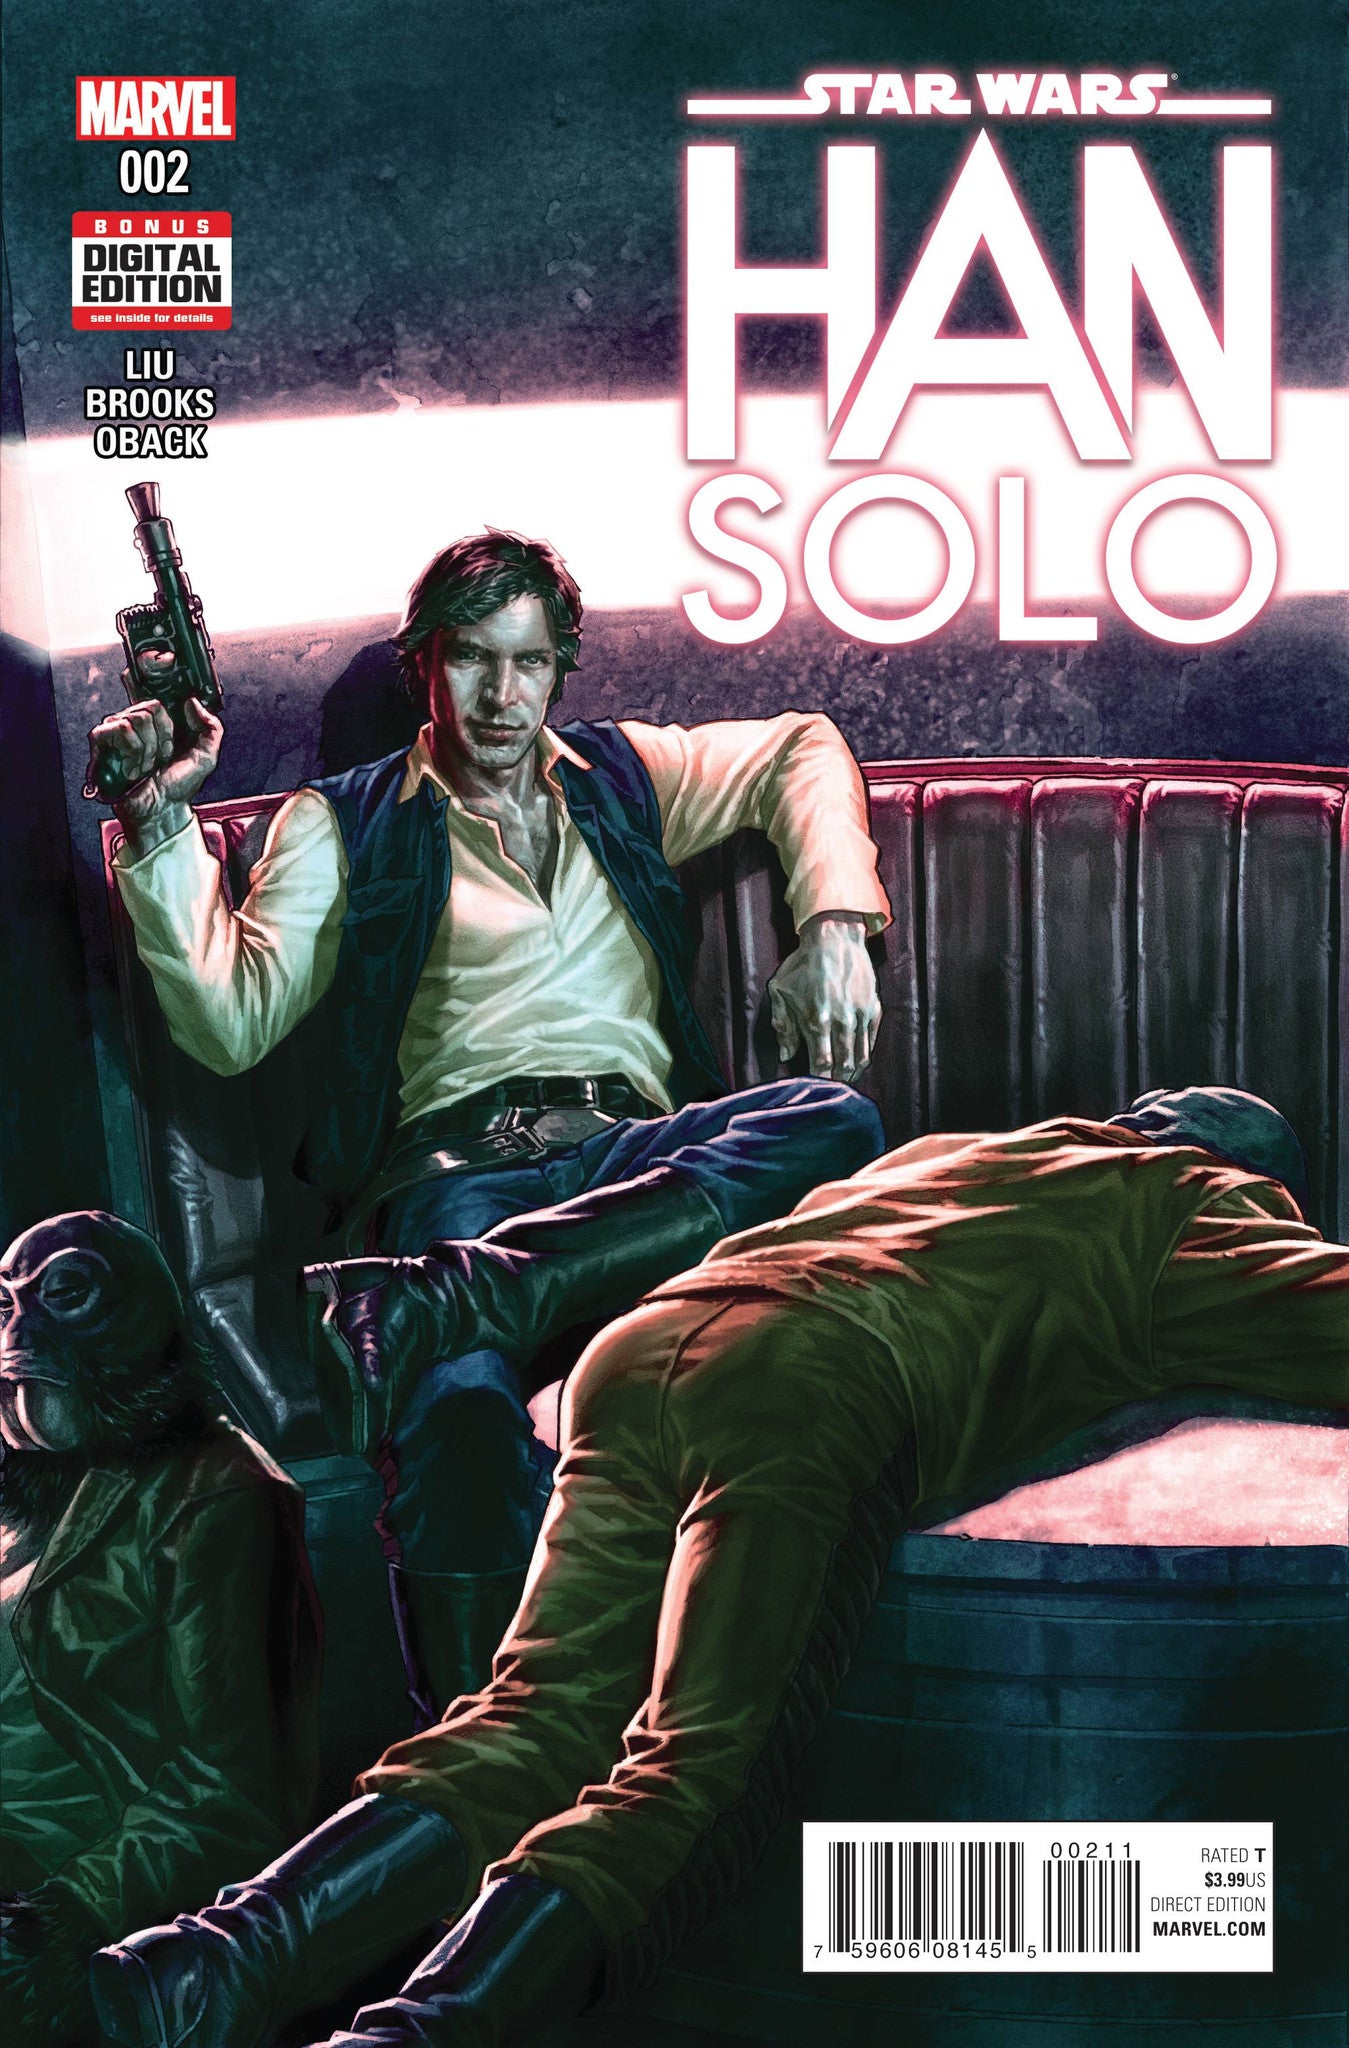 STAR WARS HAN SOLO #2 (OF 5) COVER